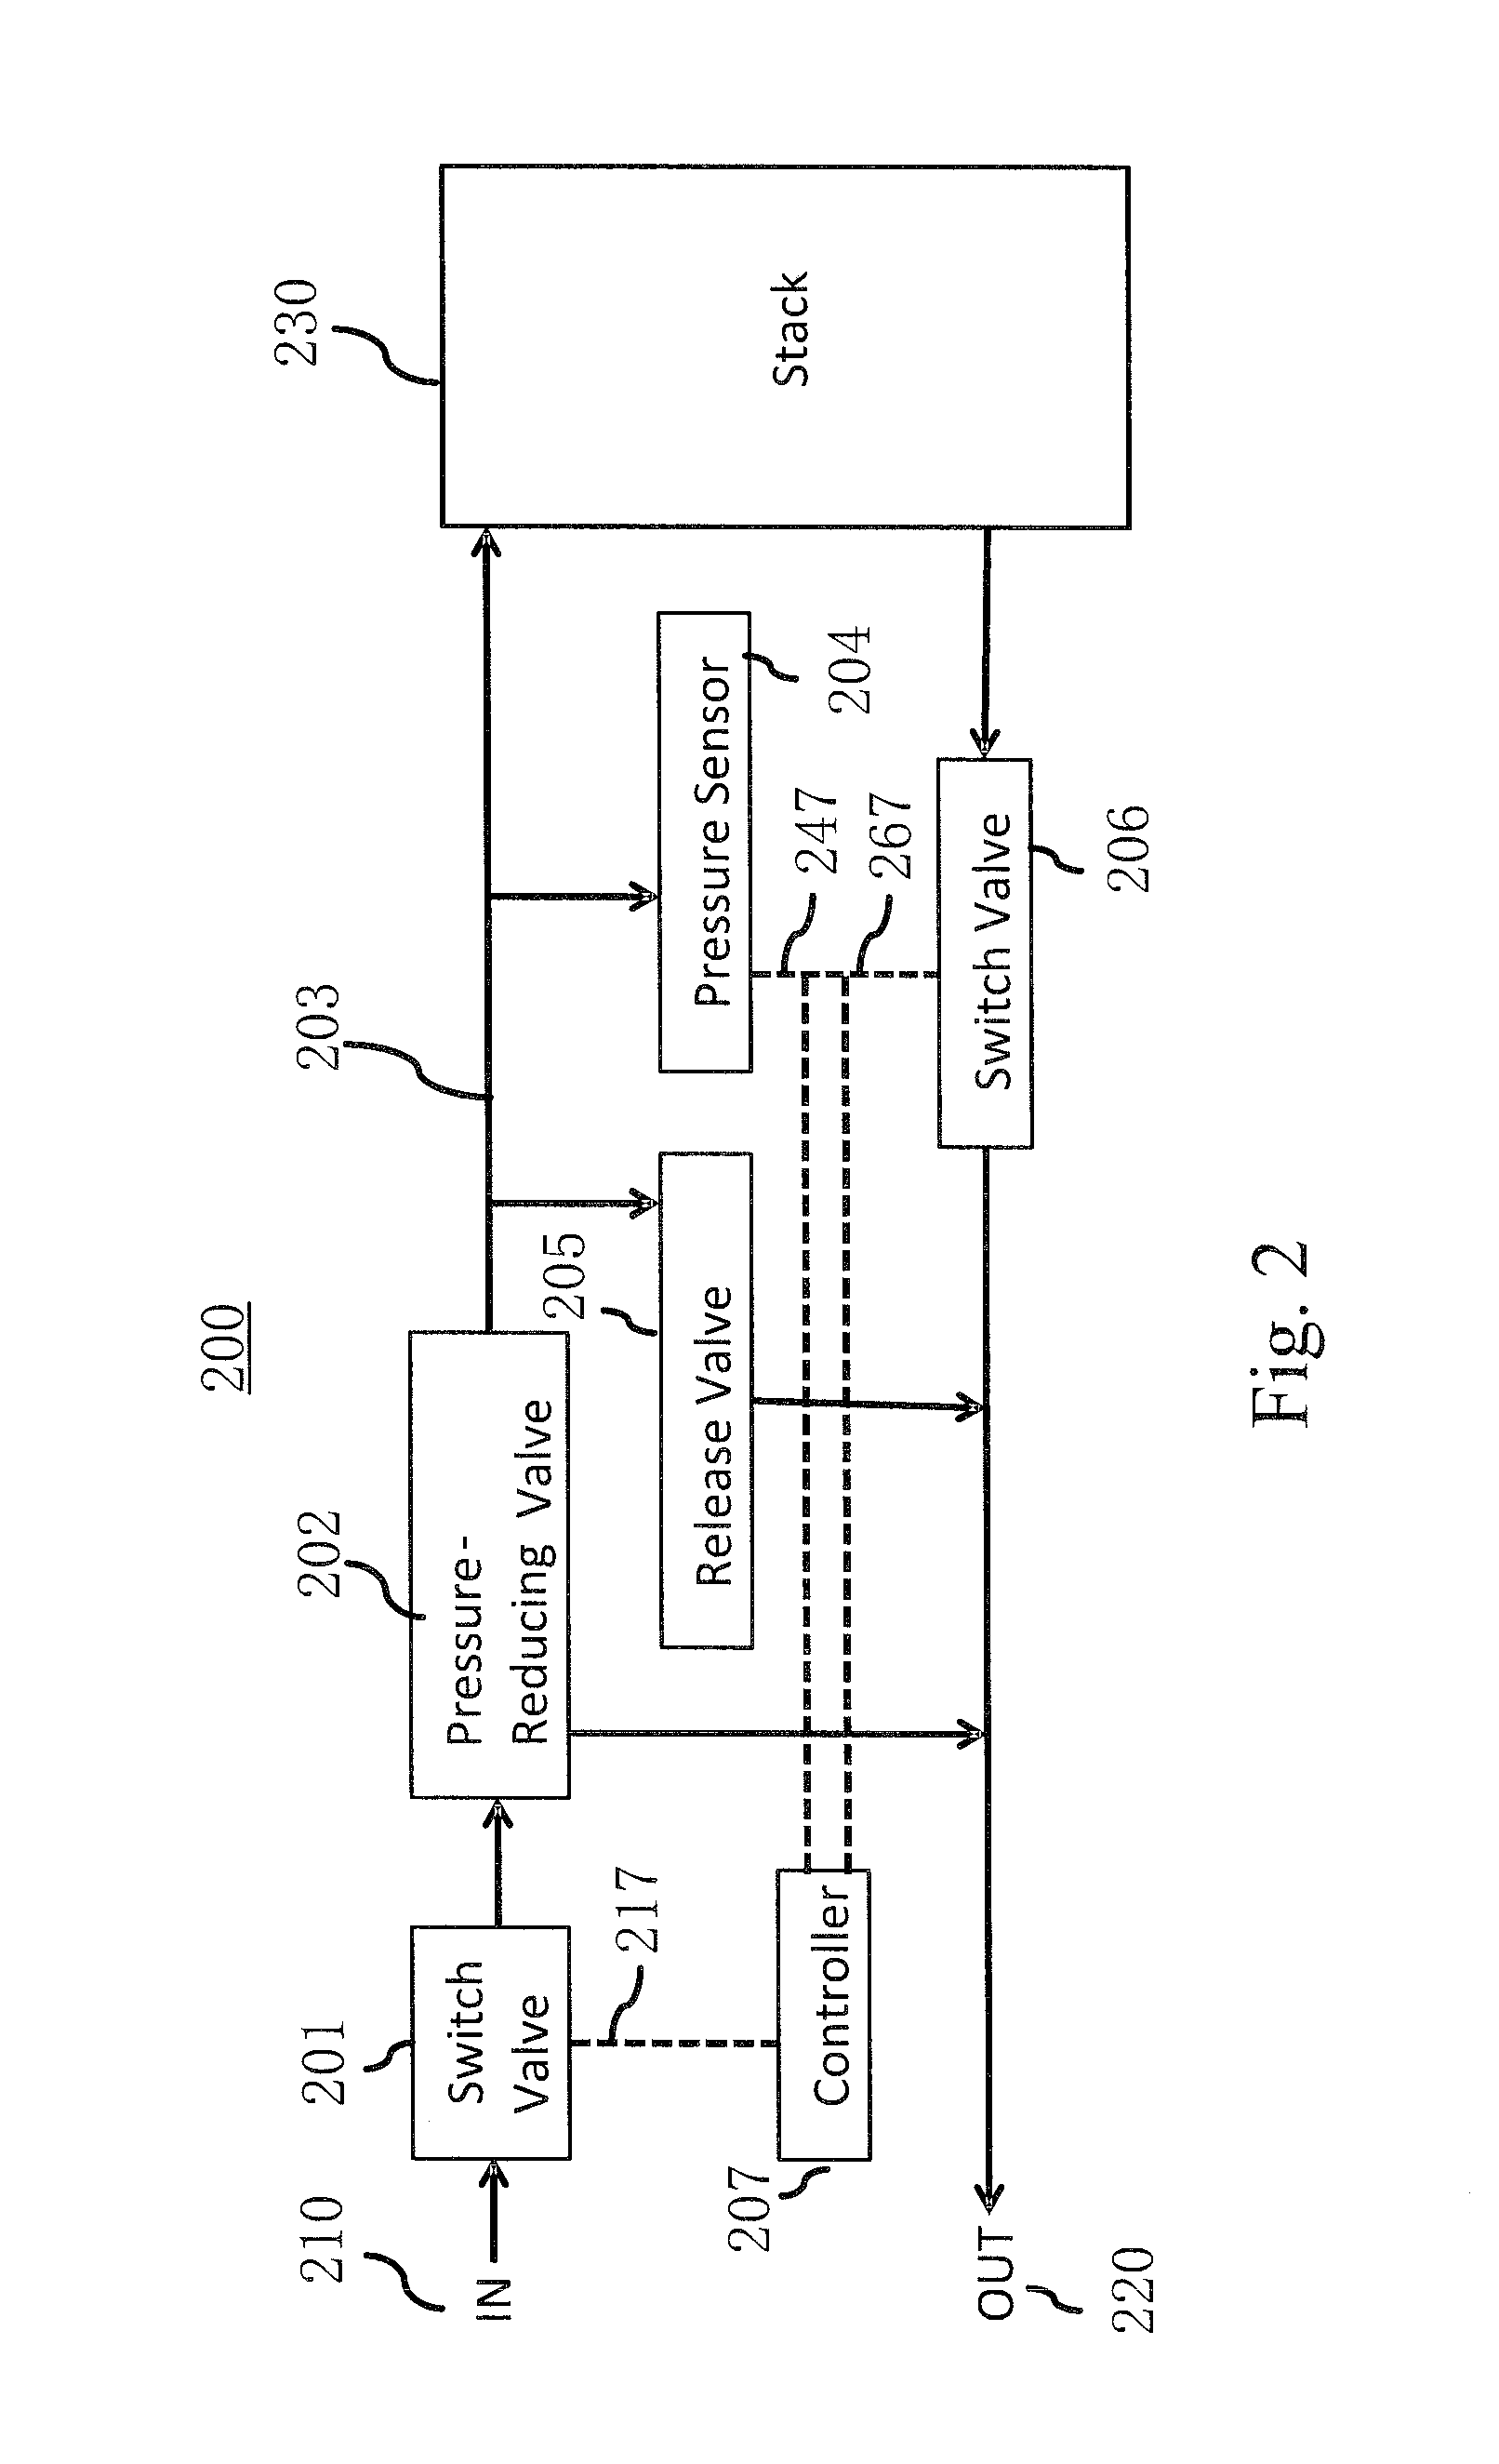 Method and system for gasflow management